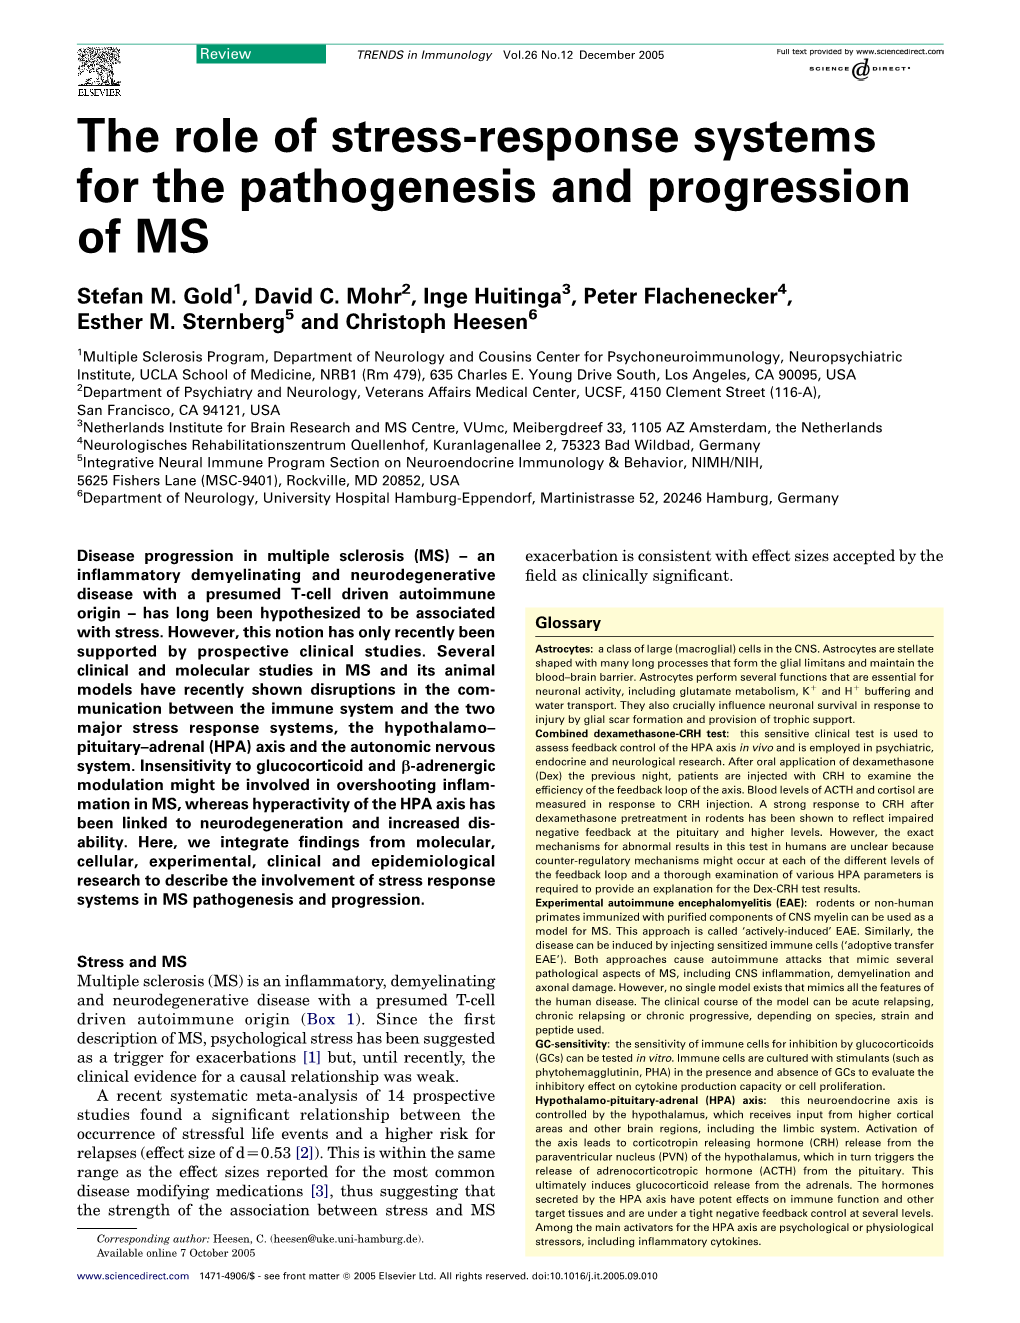 The Role of Stress-Response Systems for the Pathogenesis and Progression of MS